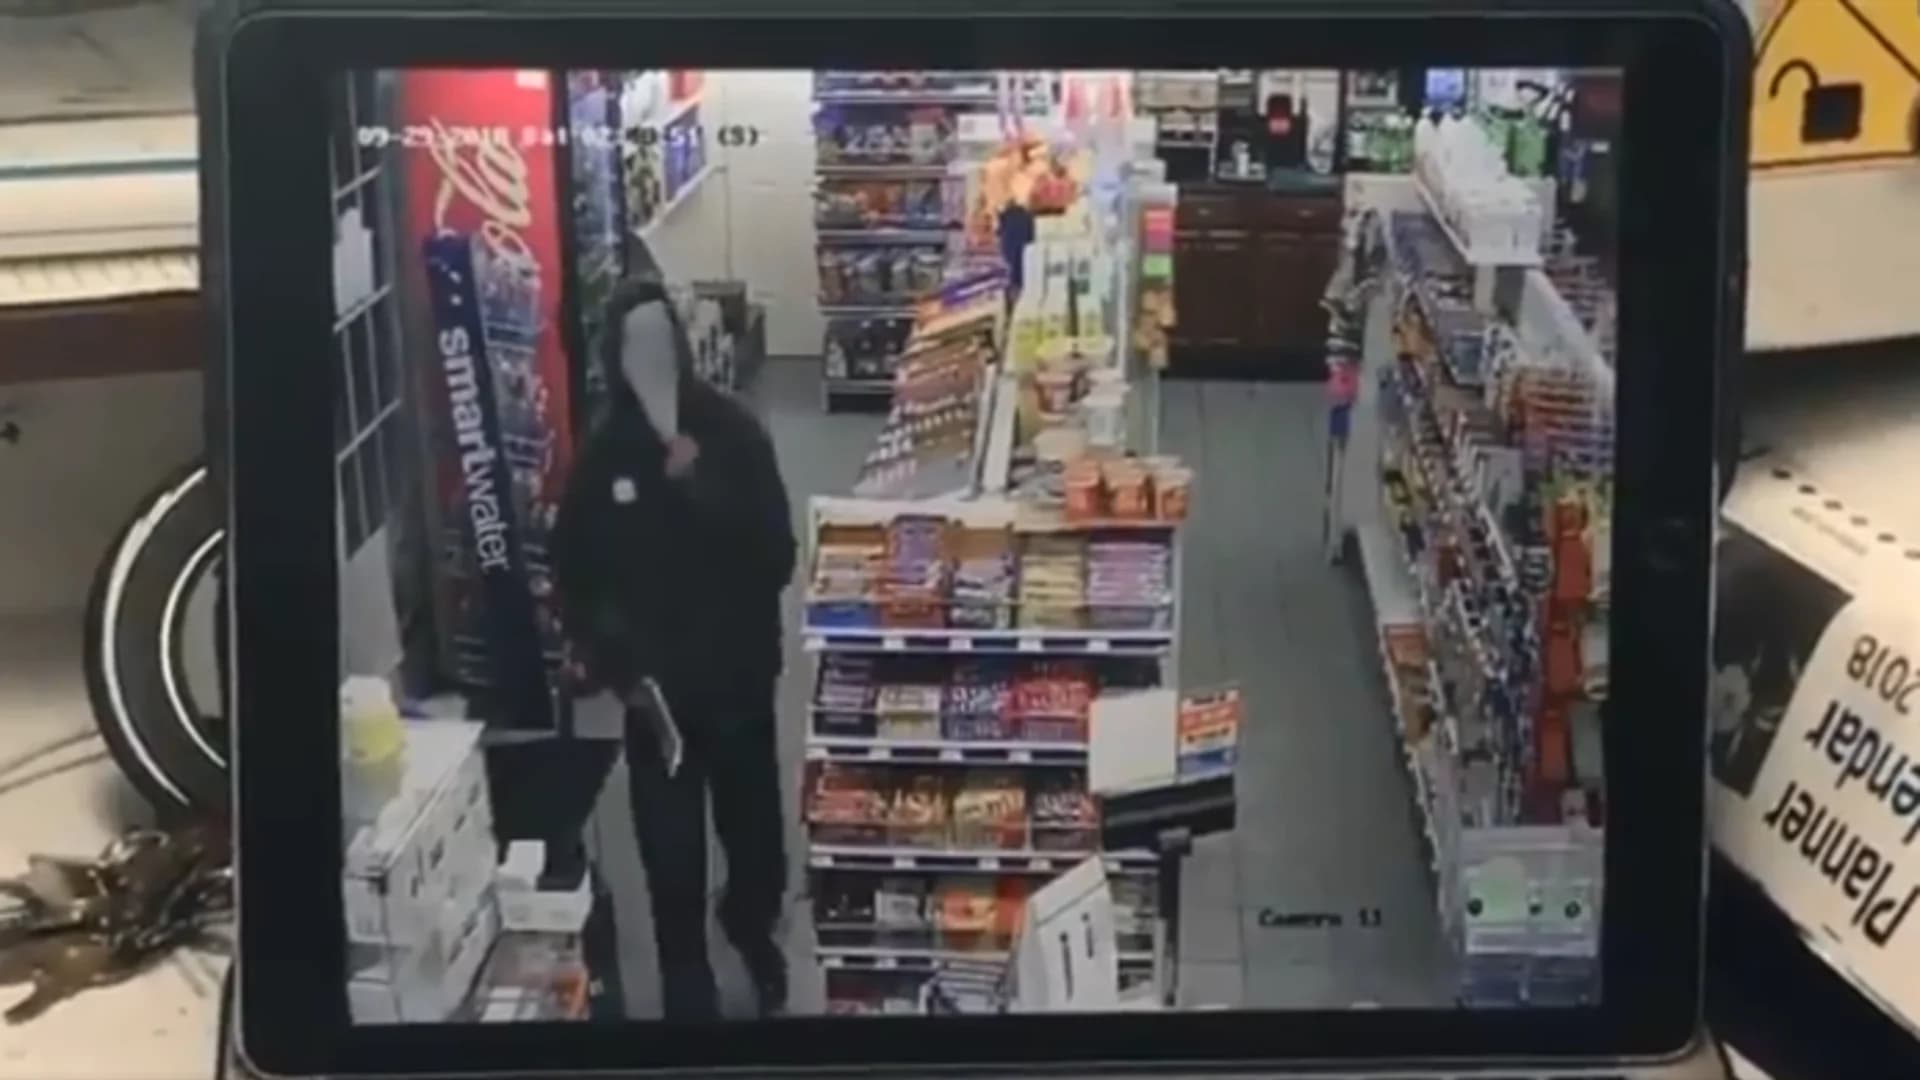 Clerk with bat chases off machete-wielding serial robbery suspect